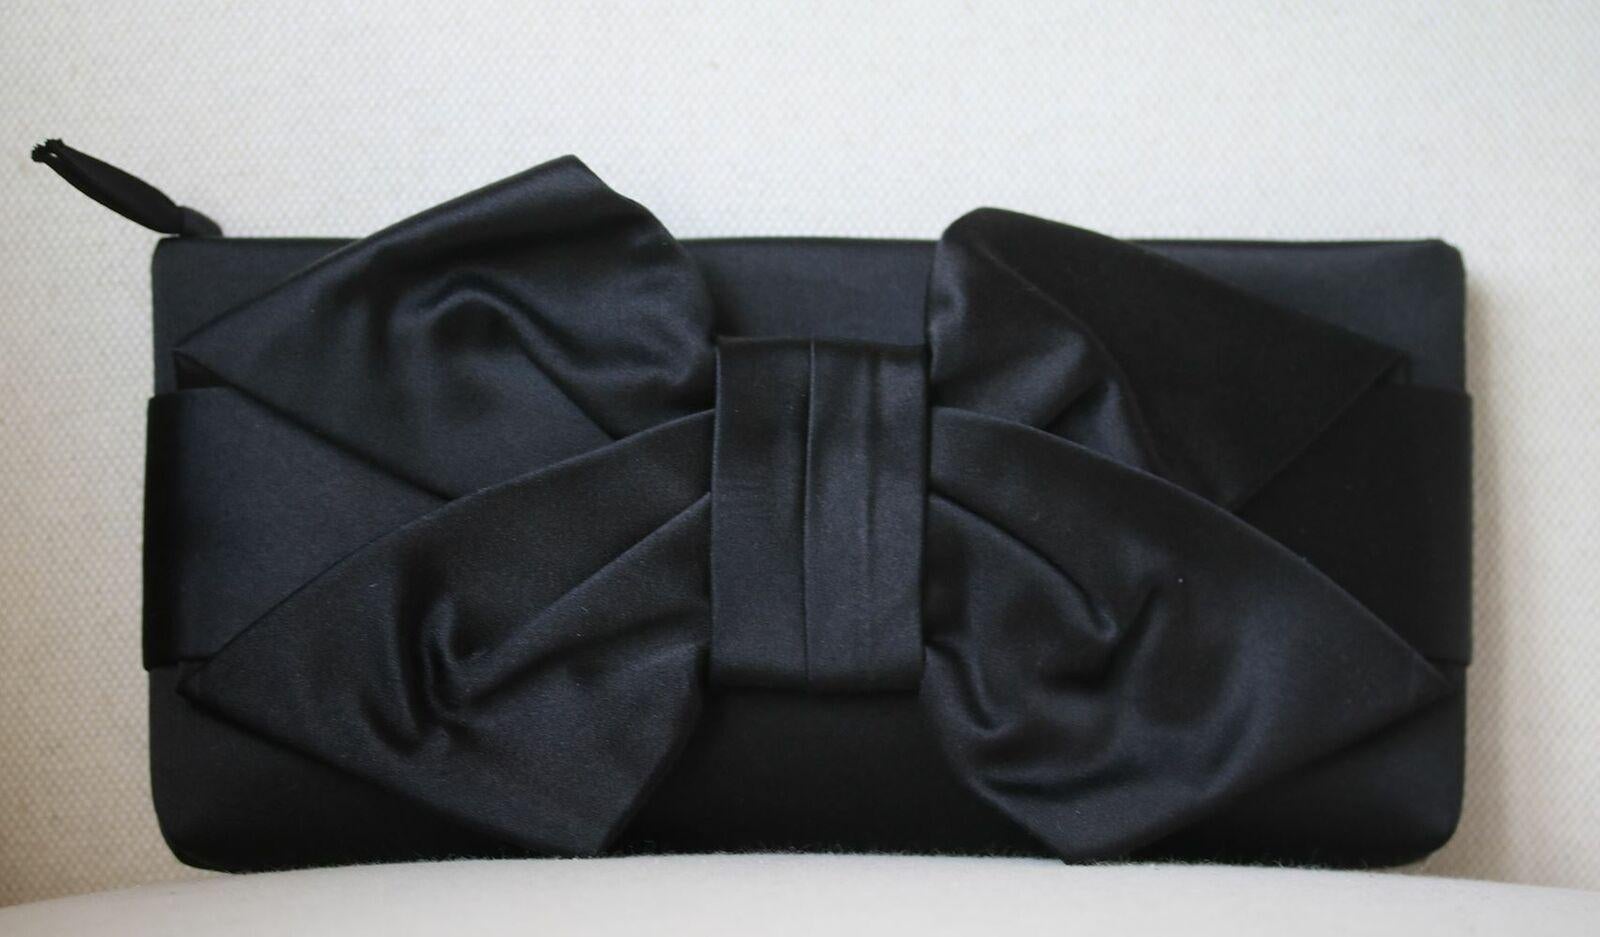 Bedecked with a beautiful bow, Valentino's black silk-satin clutch is an elegantly feminine accessory. Black silk-satin. Bow detail. Internal pouch pocket. Fully lined in champagne satin. Zip fastening along top.

Dimensions: D 2 cm x H 13 cm x W 27